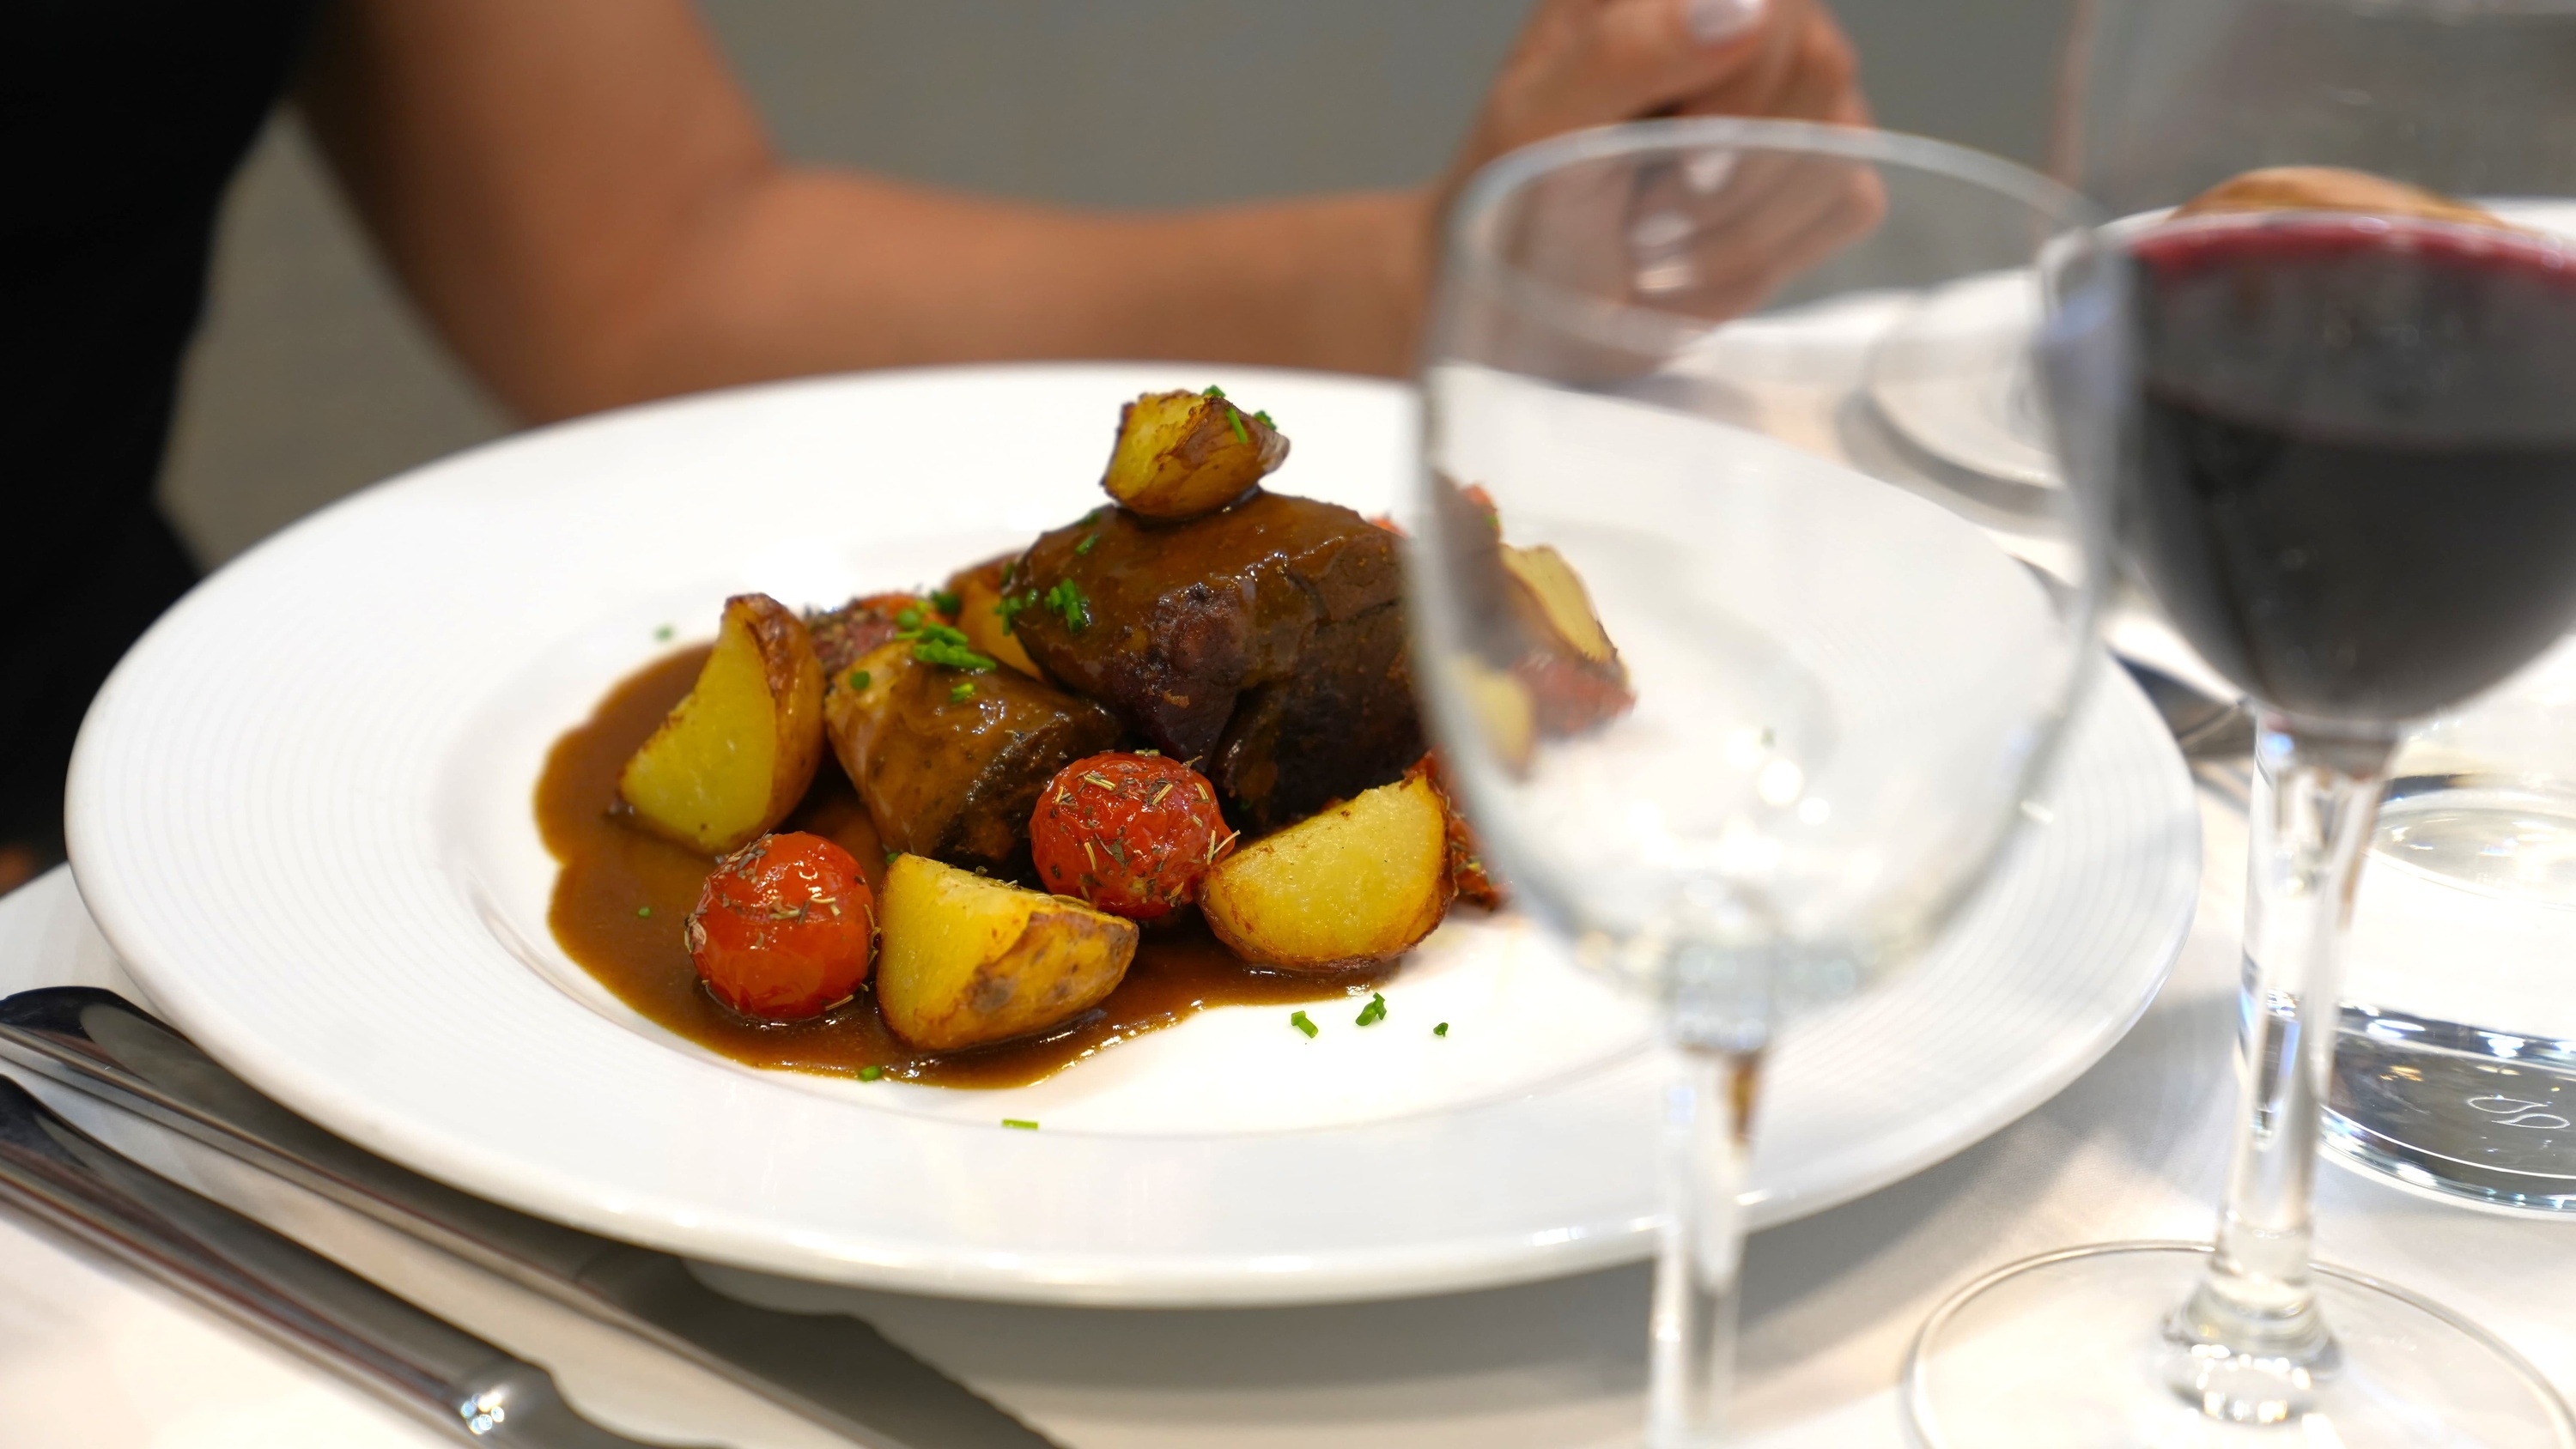 a plate of food with potatoes and tomatoes next to a glass of wine